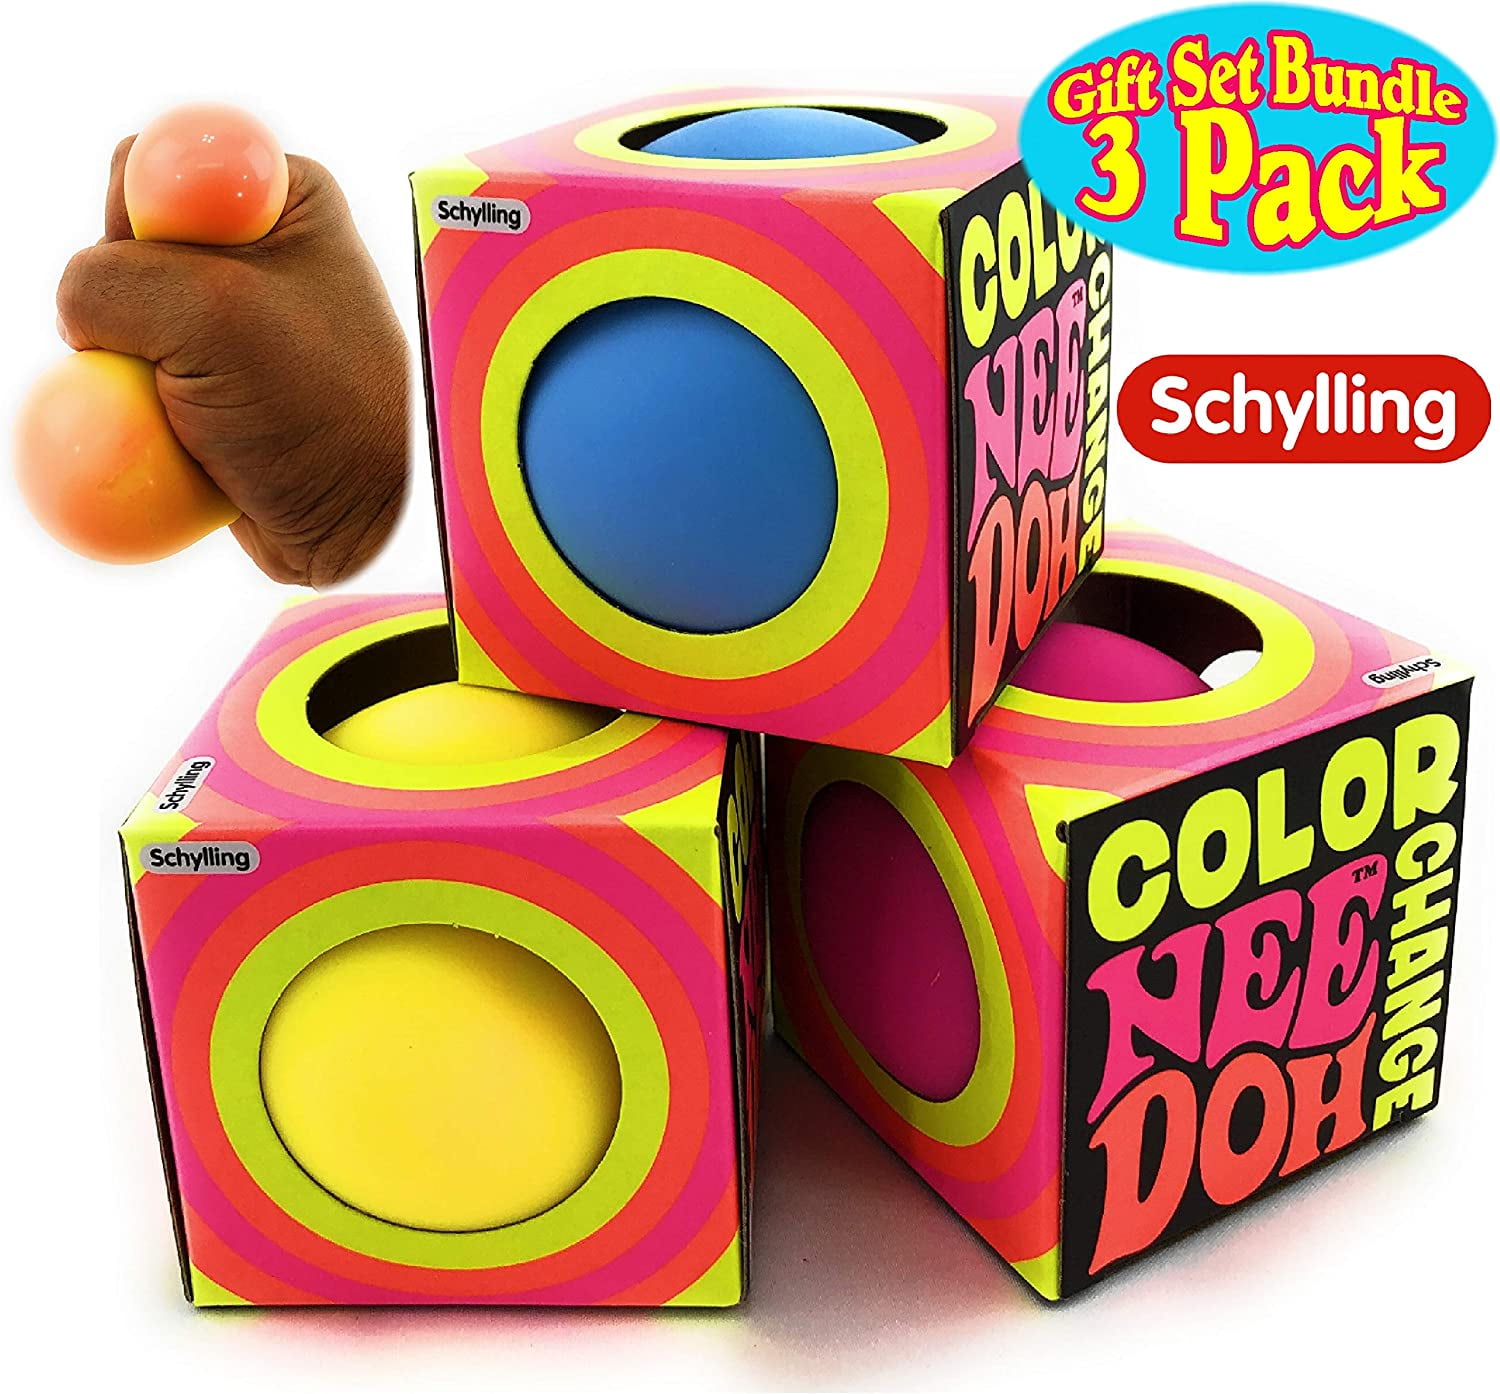 Super Nee Doh by Schylling Toys